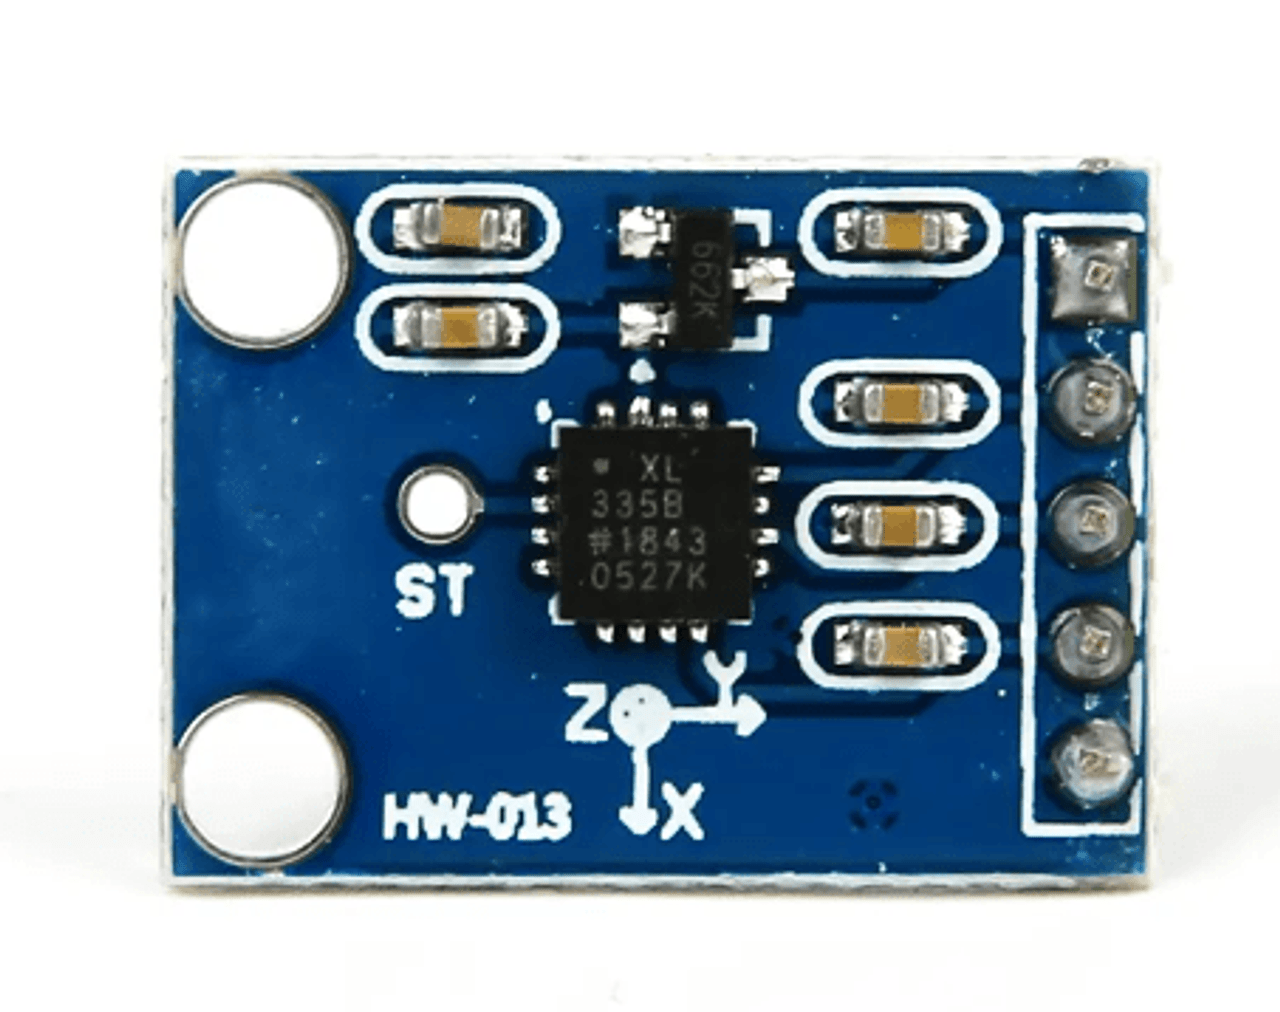 3 axis accelerometer, three axis accelerometer, 3 axial accelerometer, 3 axis acceleration sensor, three axis accelerometer sensor